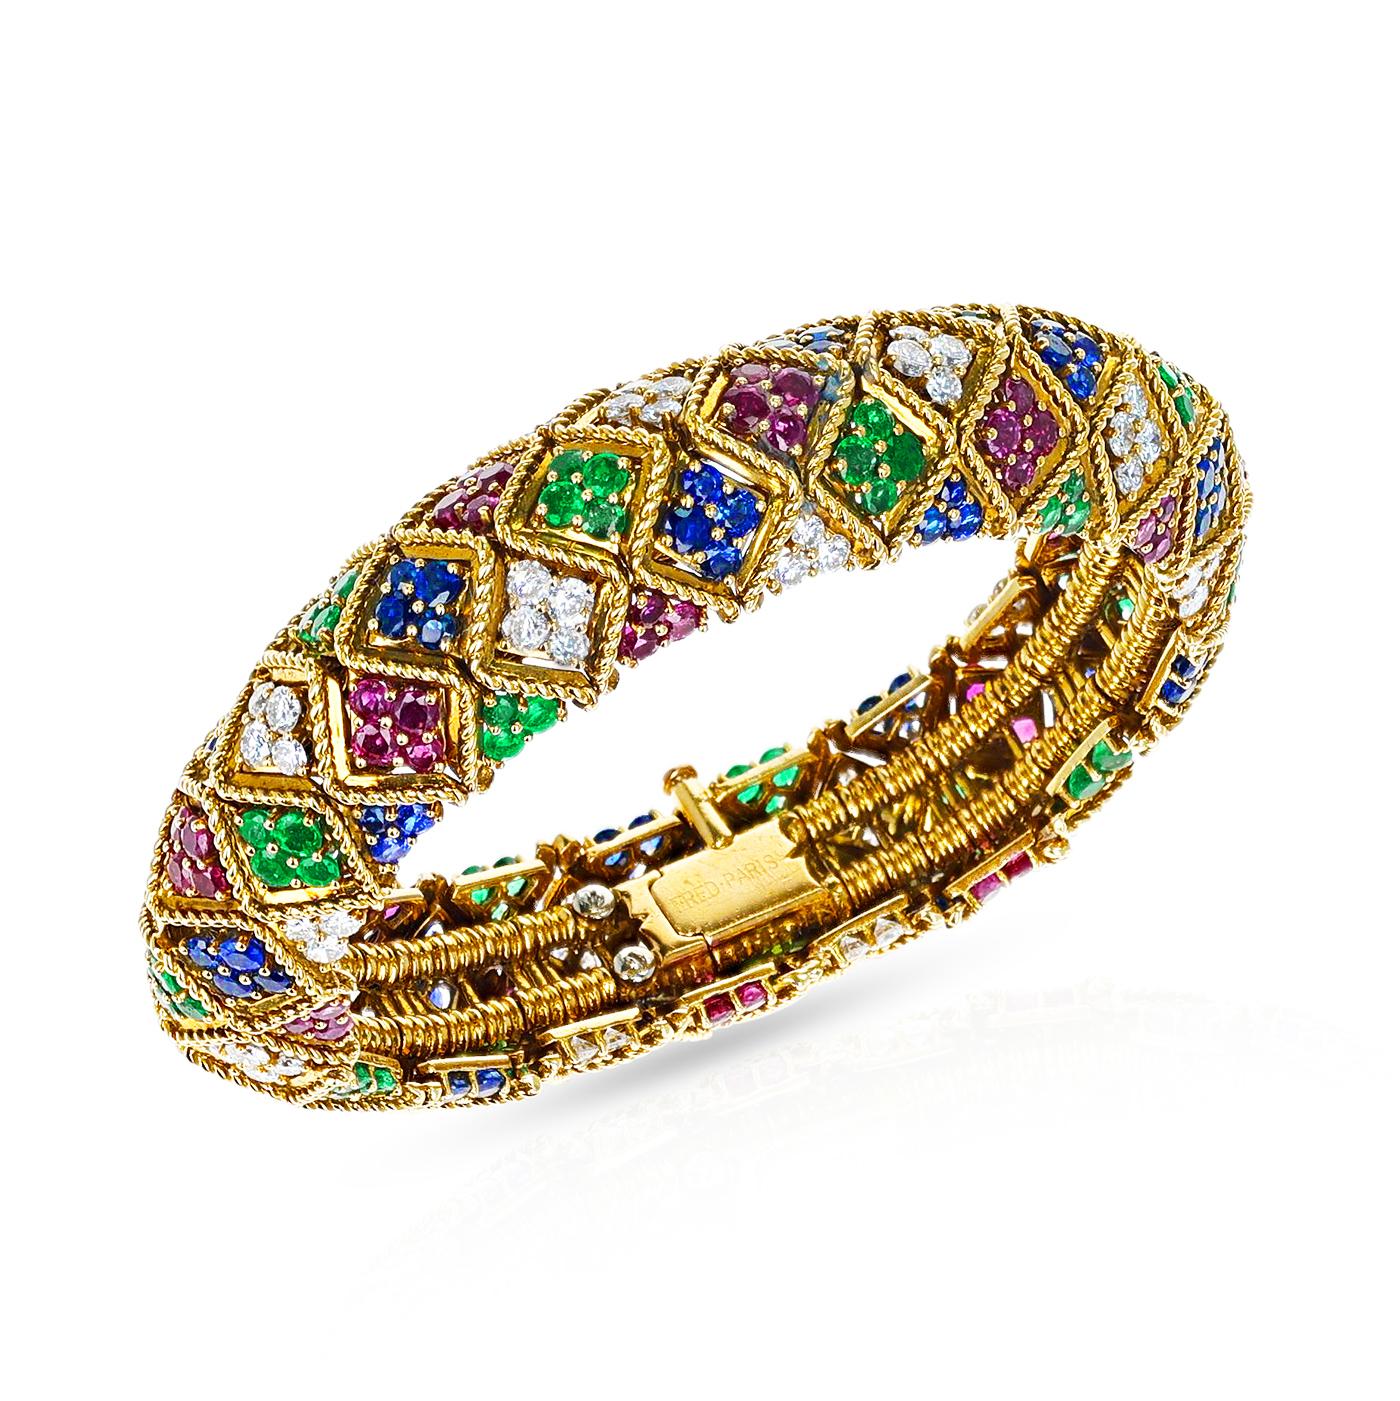 Fred Paris Ruby, Emerald, Sapphire and Diamond Bangle and Earring Set, 18k For Sale 3